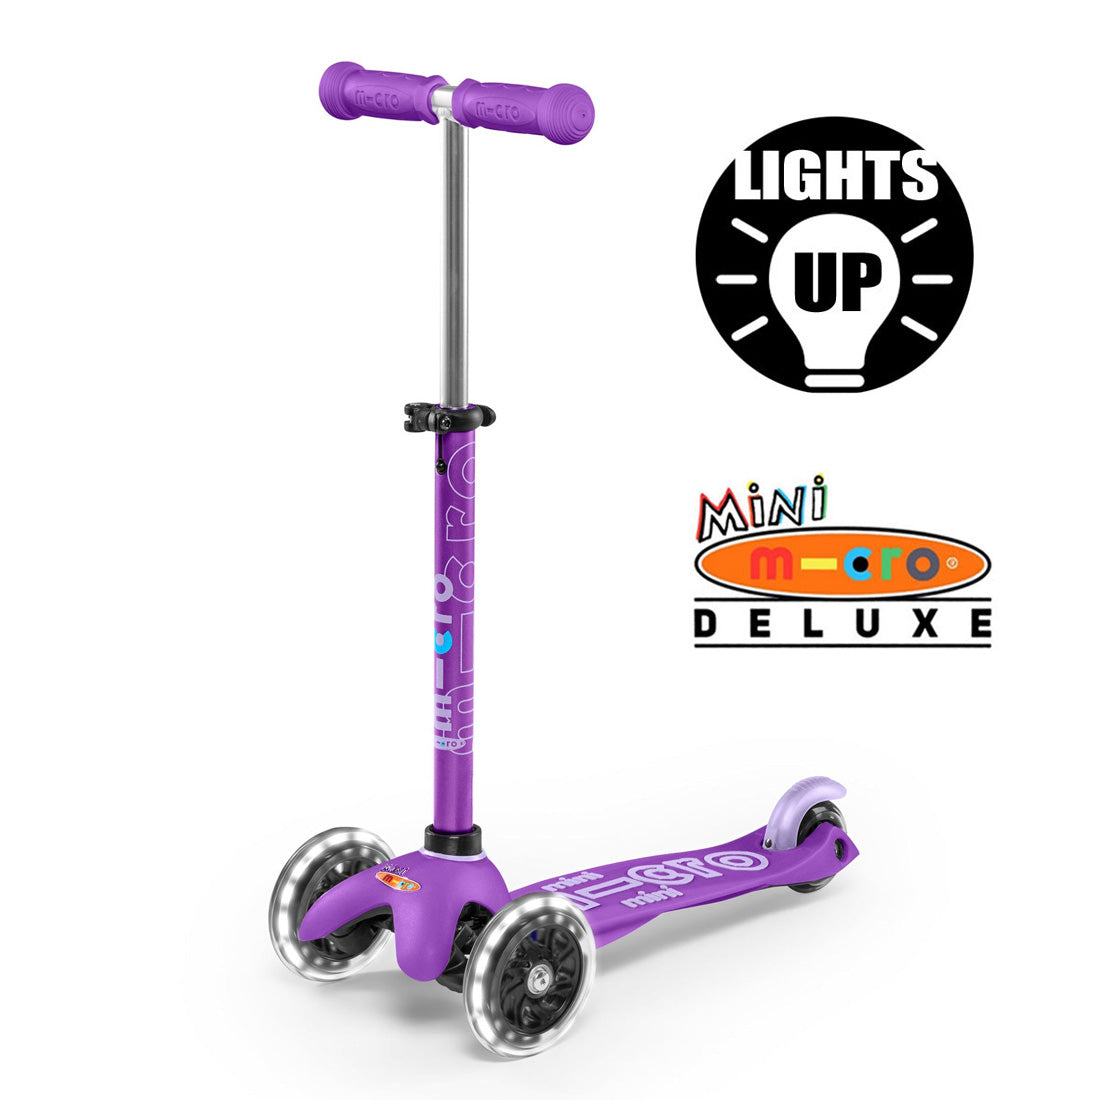 Micro Mini Deluxe LED Scooter - Purple Scooter Completes Rec